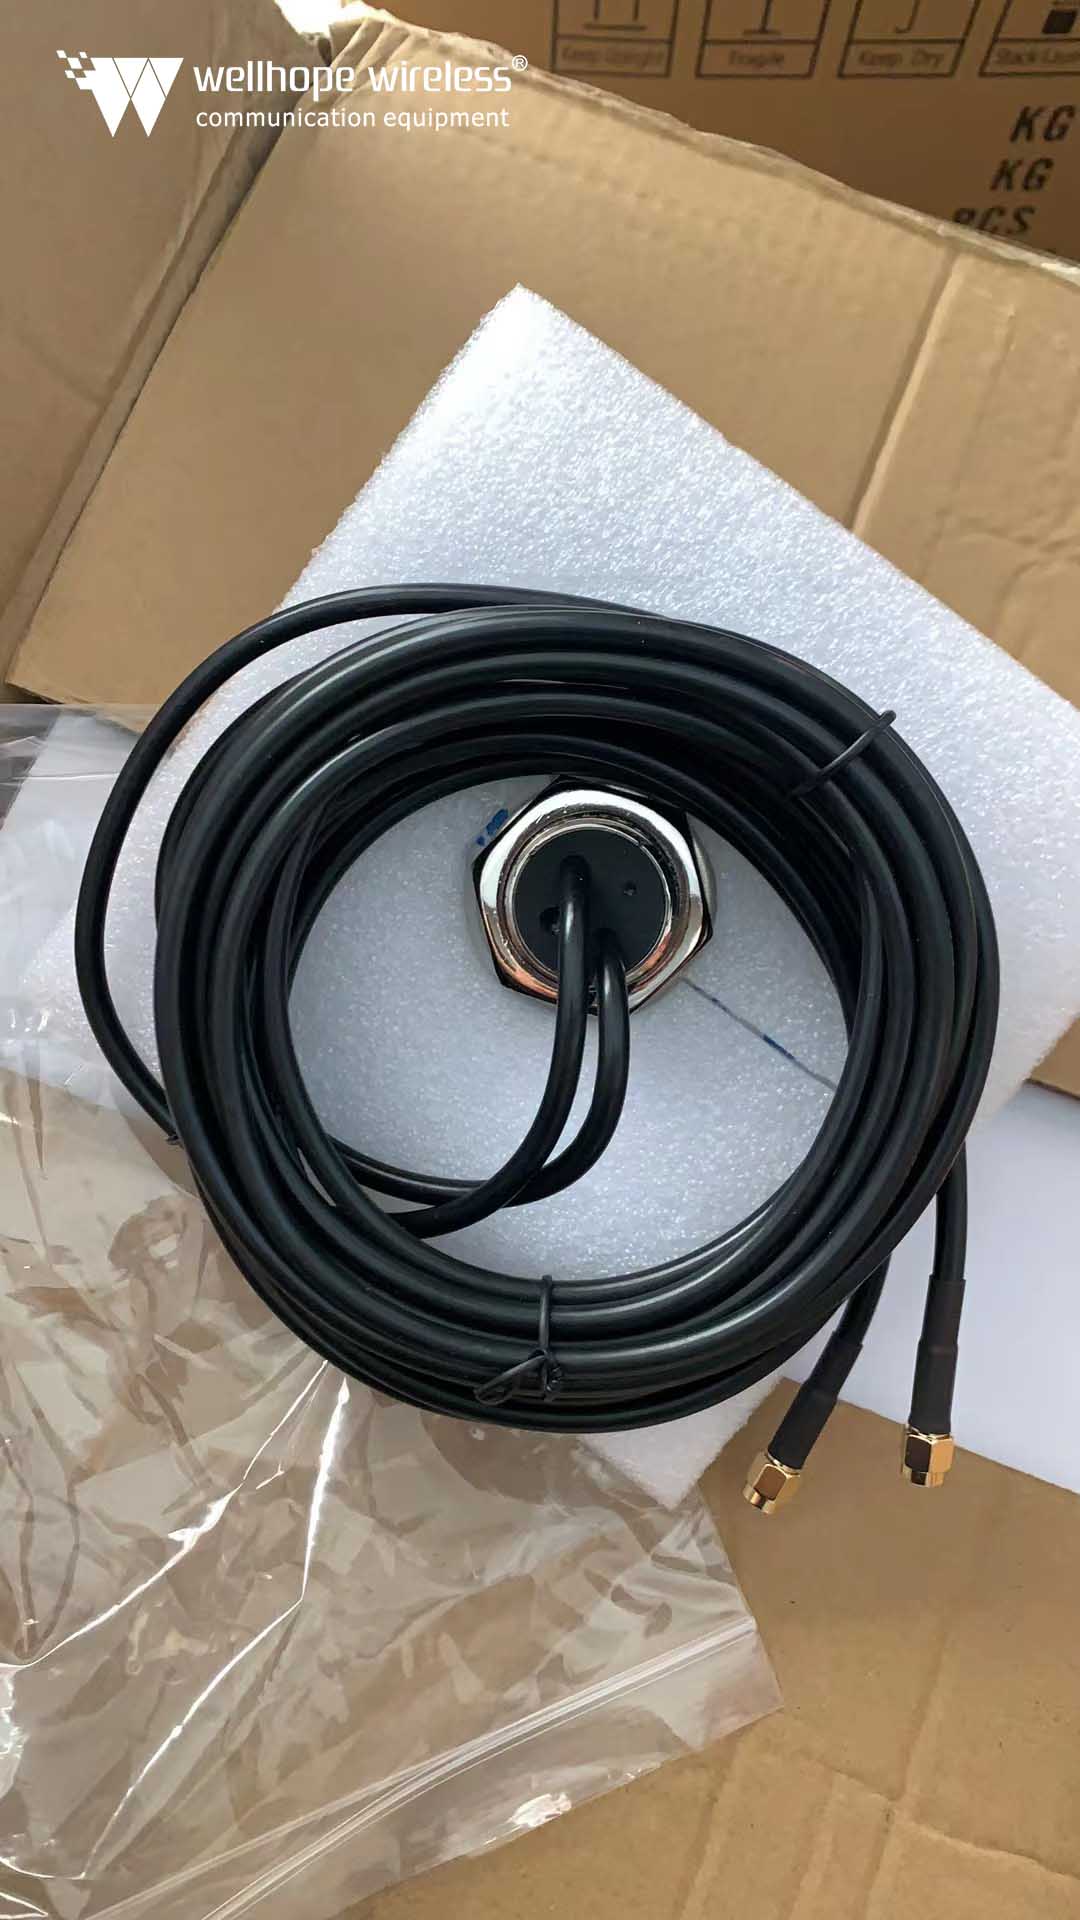 WH-4G-D3X2 4G mimo antenna